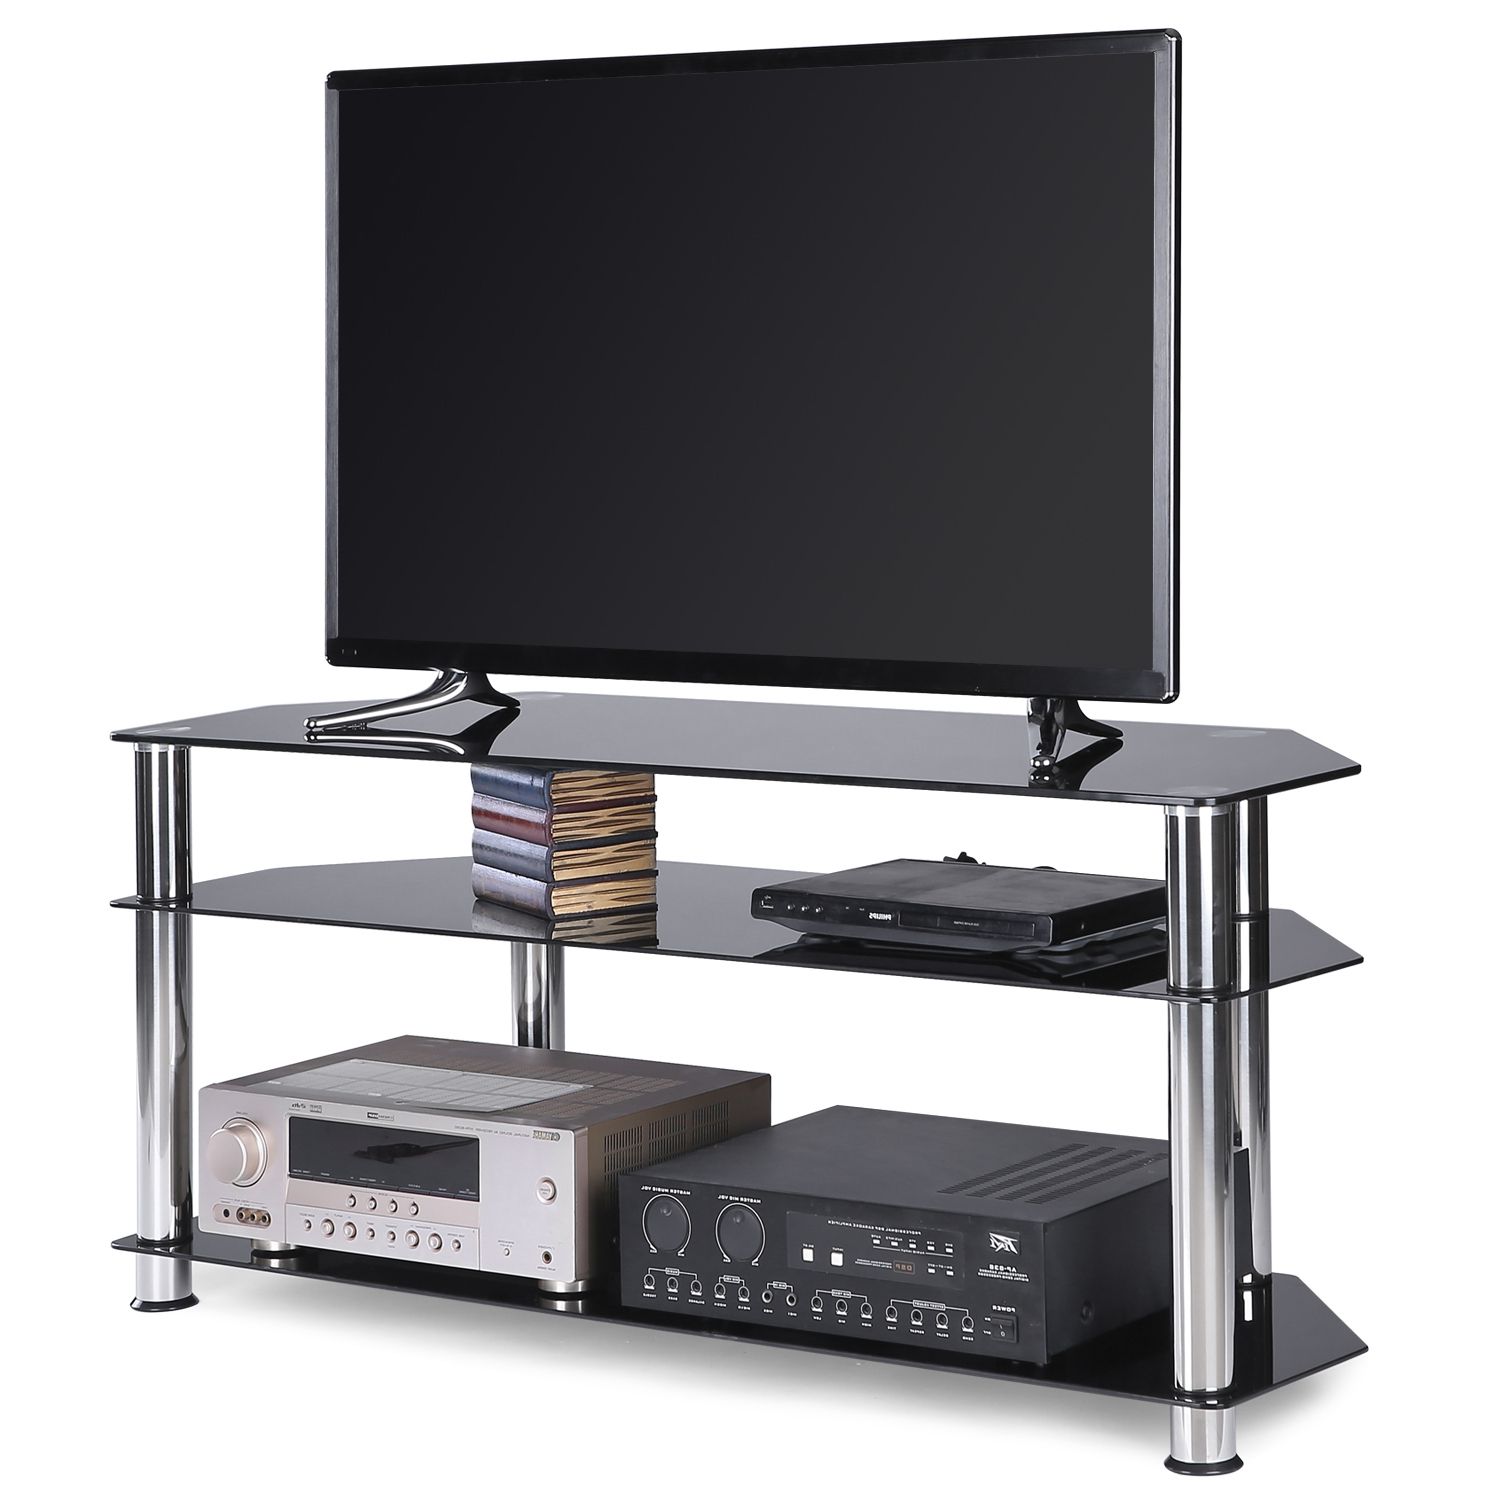 Sahika Tv Stands For Tvs Up To 55" Intended For Preferred Contemporary Black Corner Glass Tv Stand For Tvs Up To  (View 5 of 25)